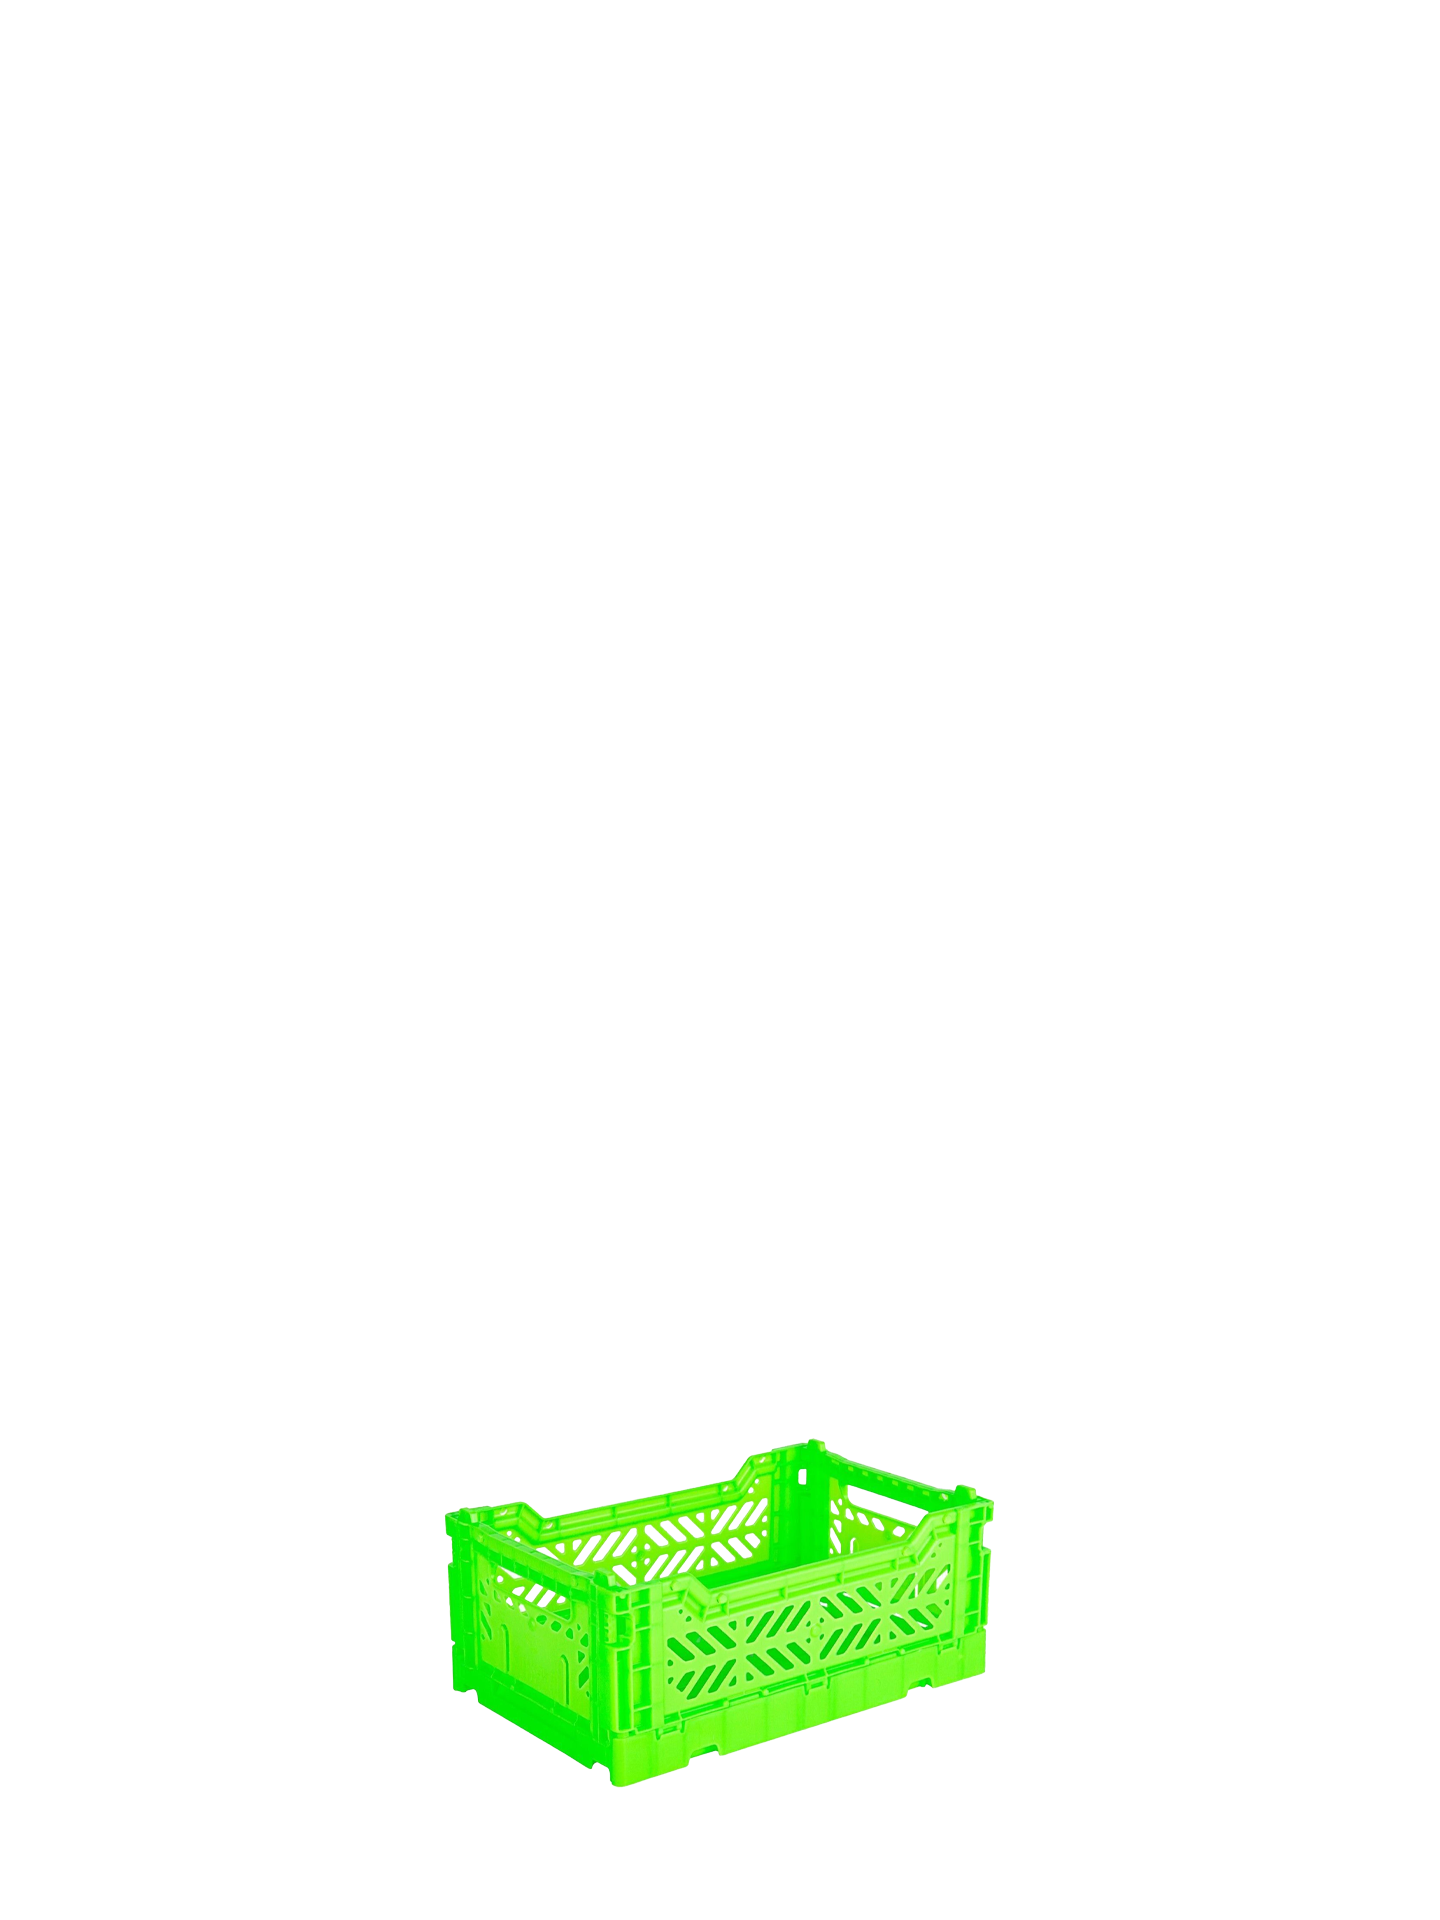 Foldable and stackable Aykasa mini sized crate in neon green.